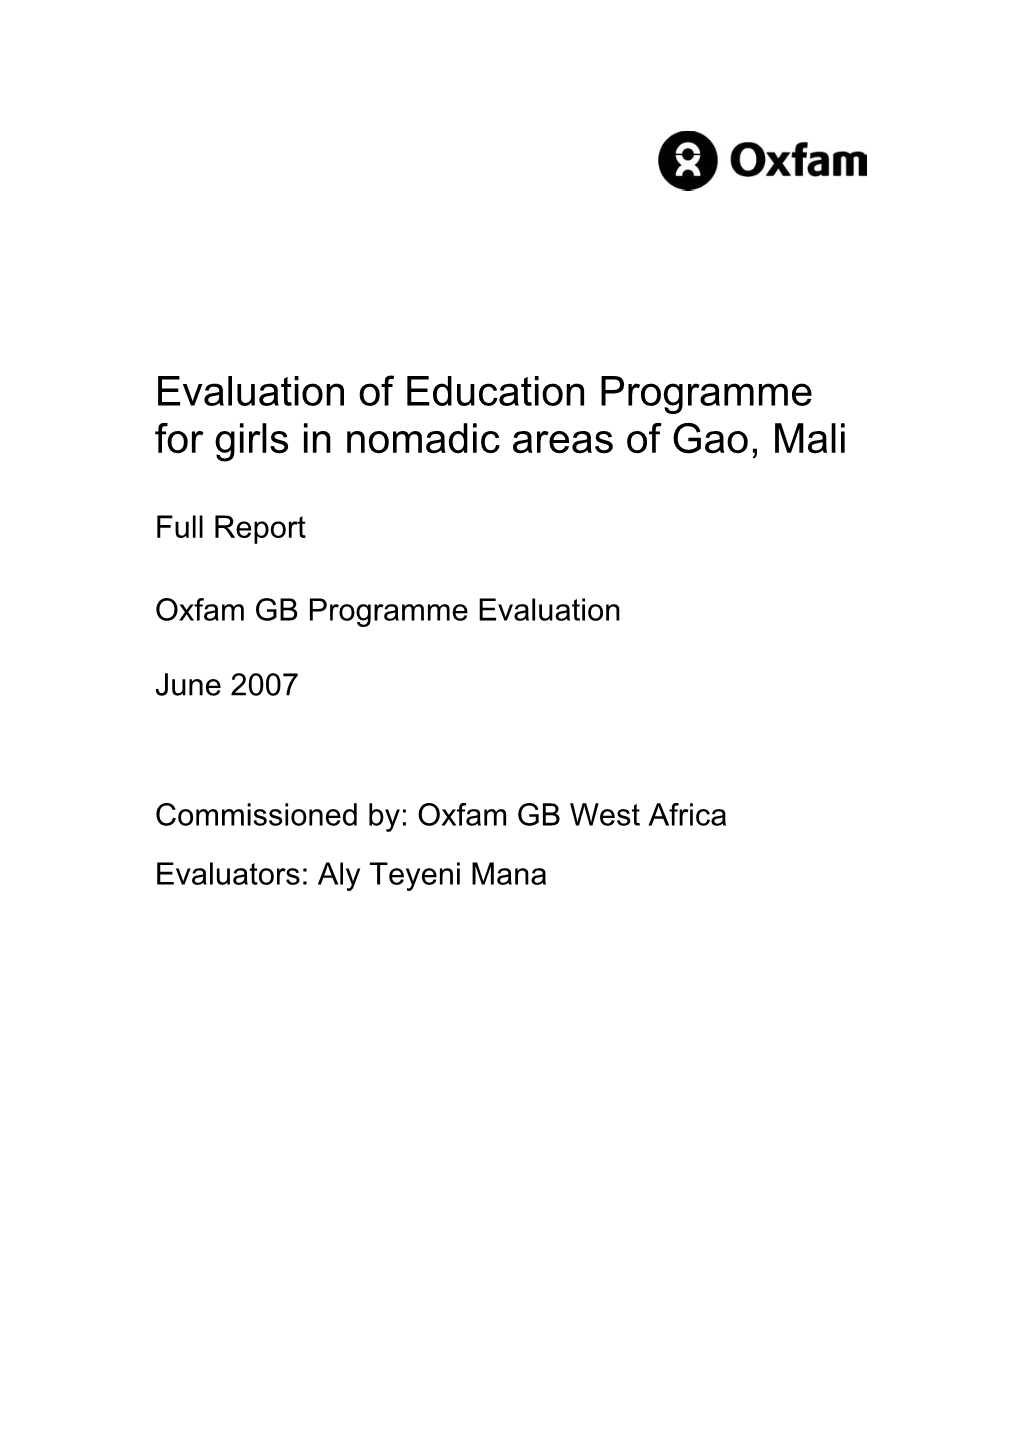 Evaluation of Education Programme for Girls in Nomadic Areas of Gao, Mali